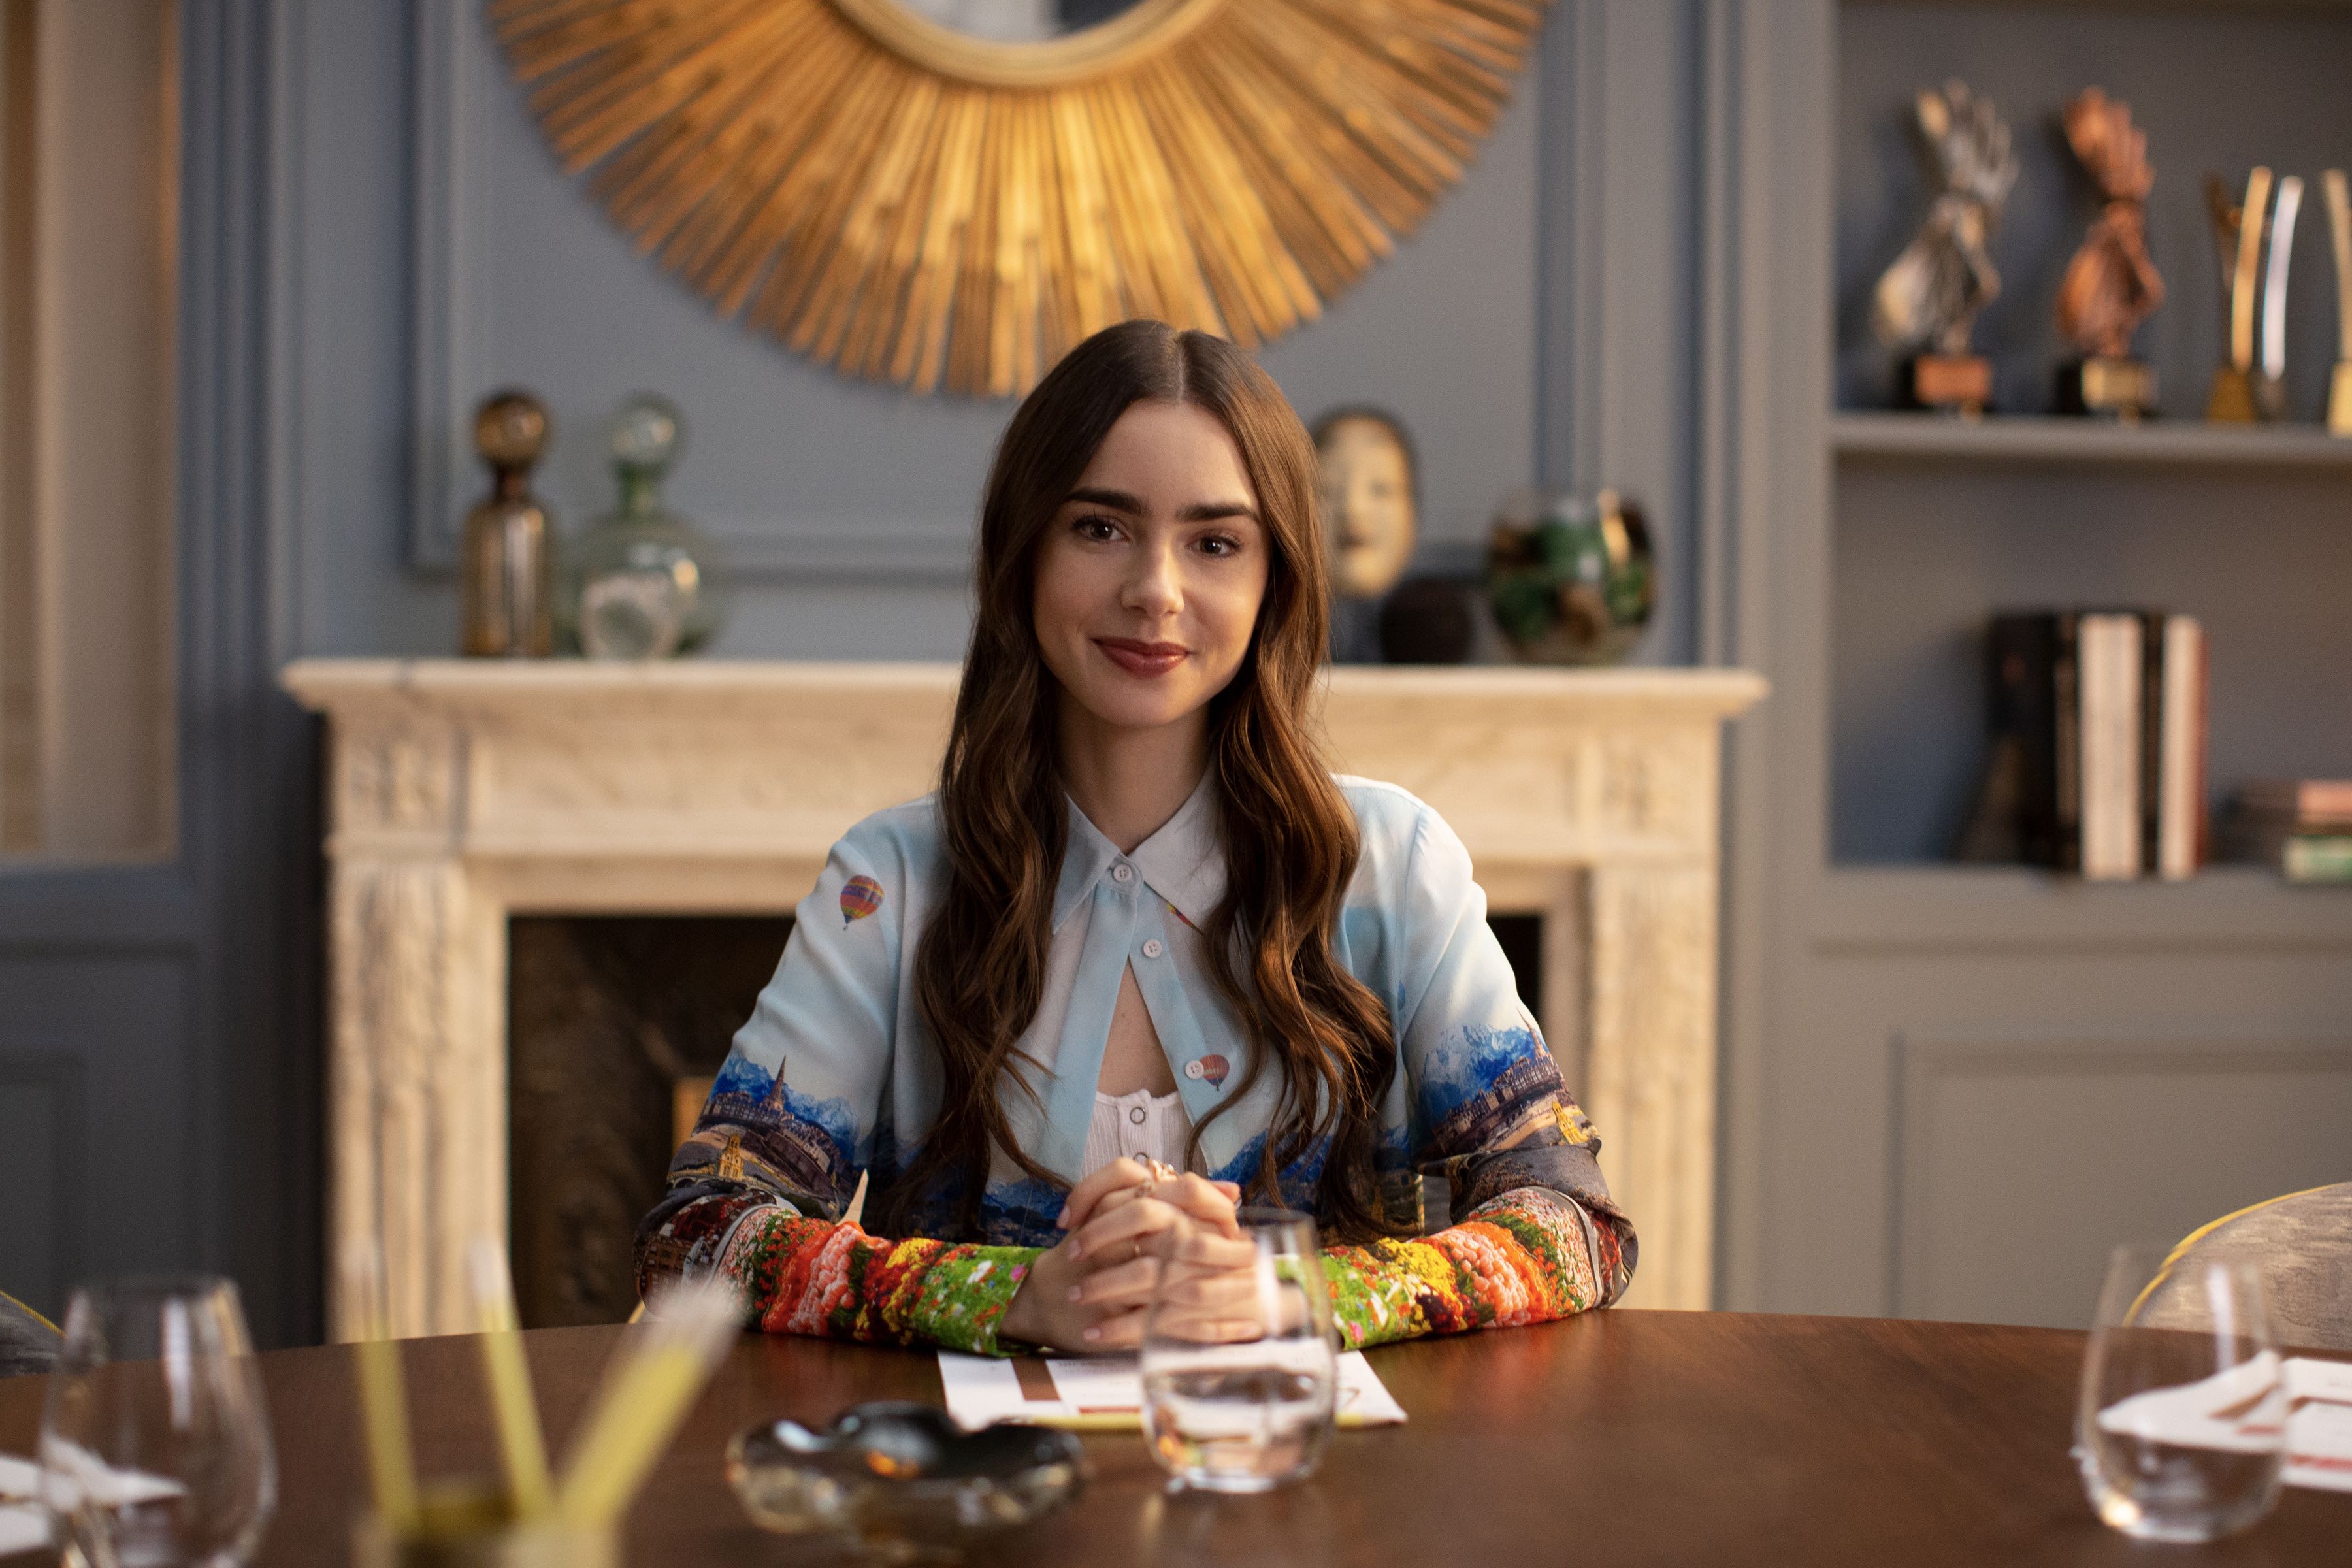 Emily in Paris Cast - Lily Collins as Emily Cooper